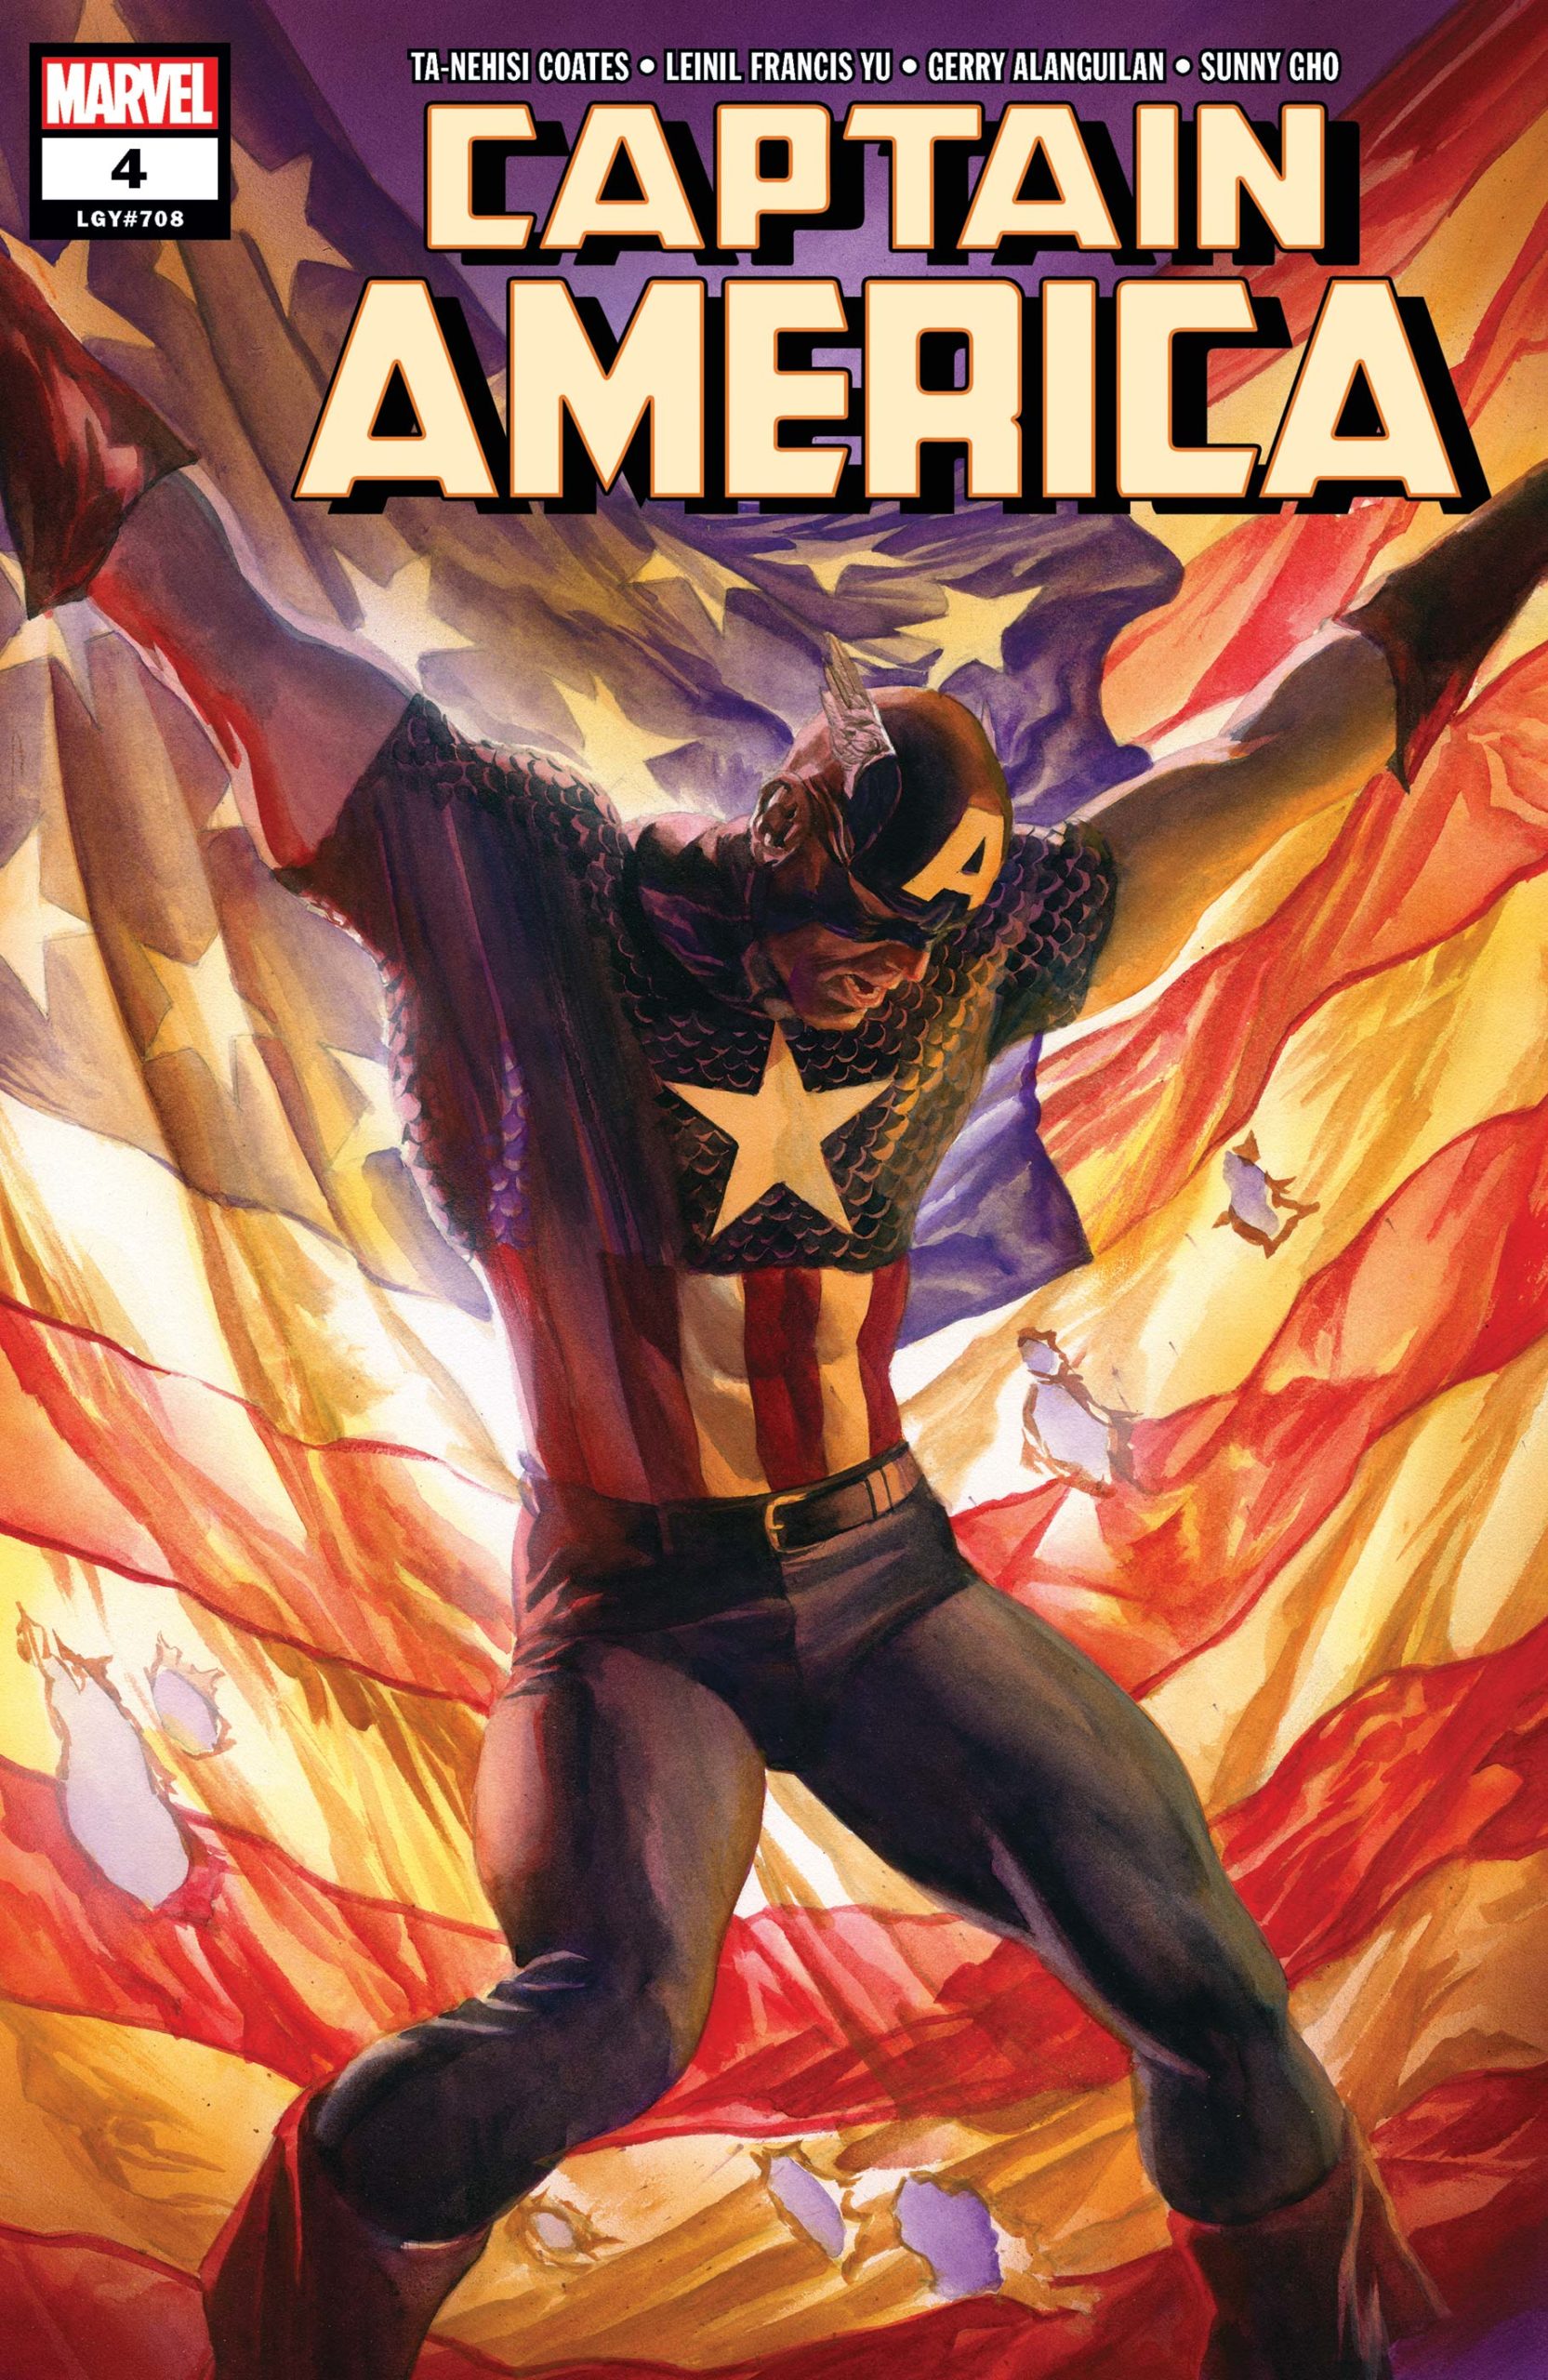 The cover of Captain America #4 (Image: Alex Ross/Marvel)